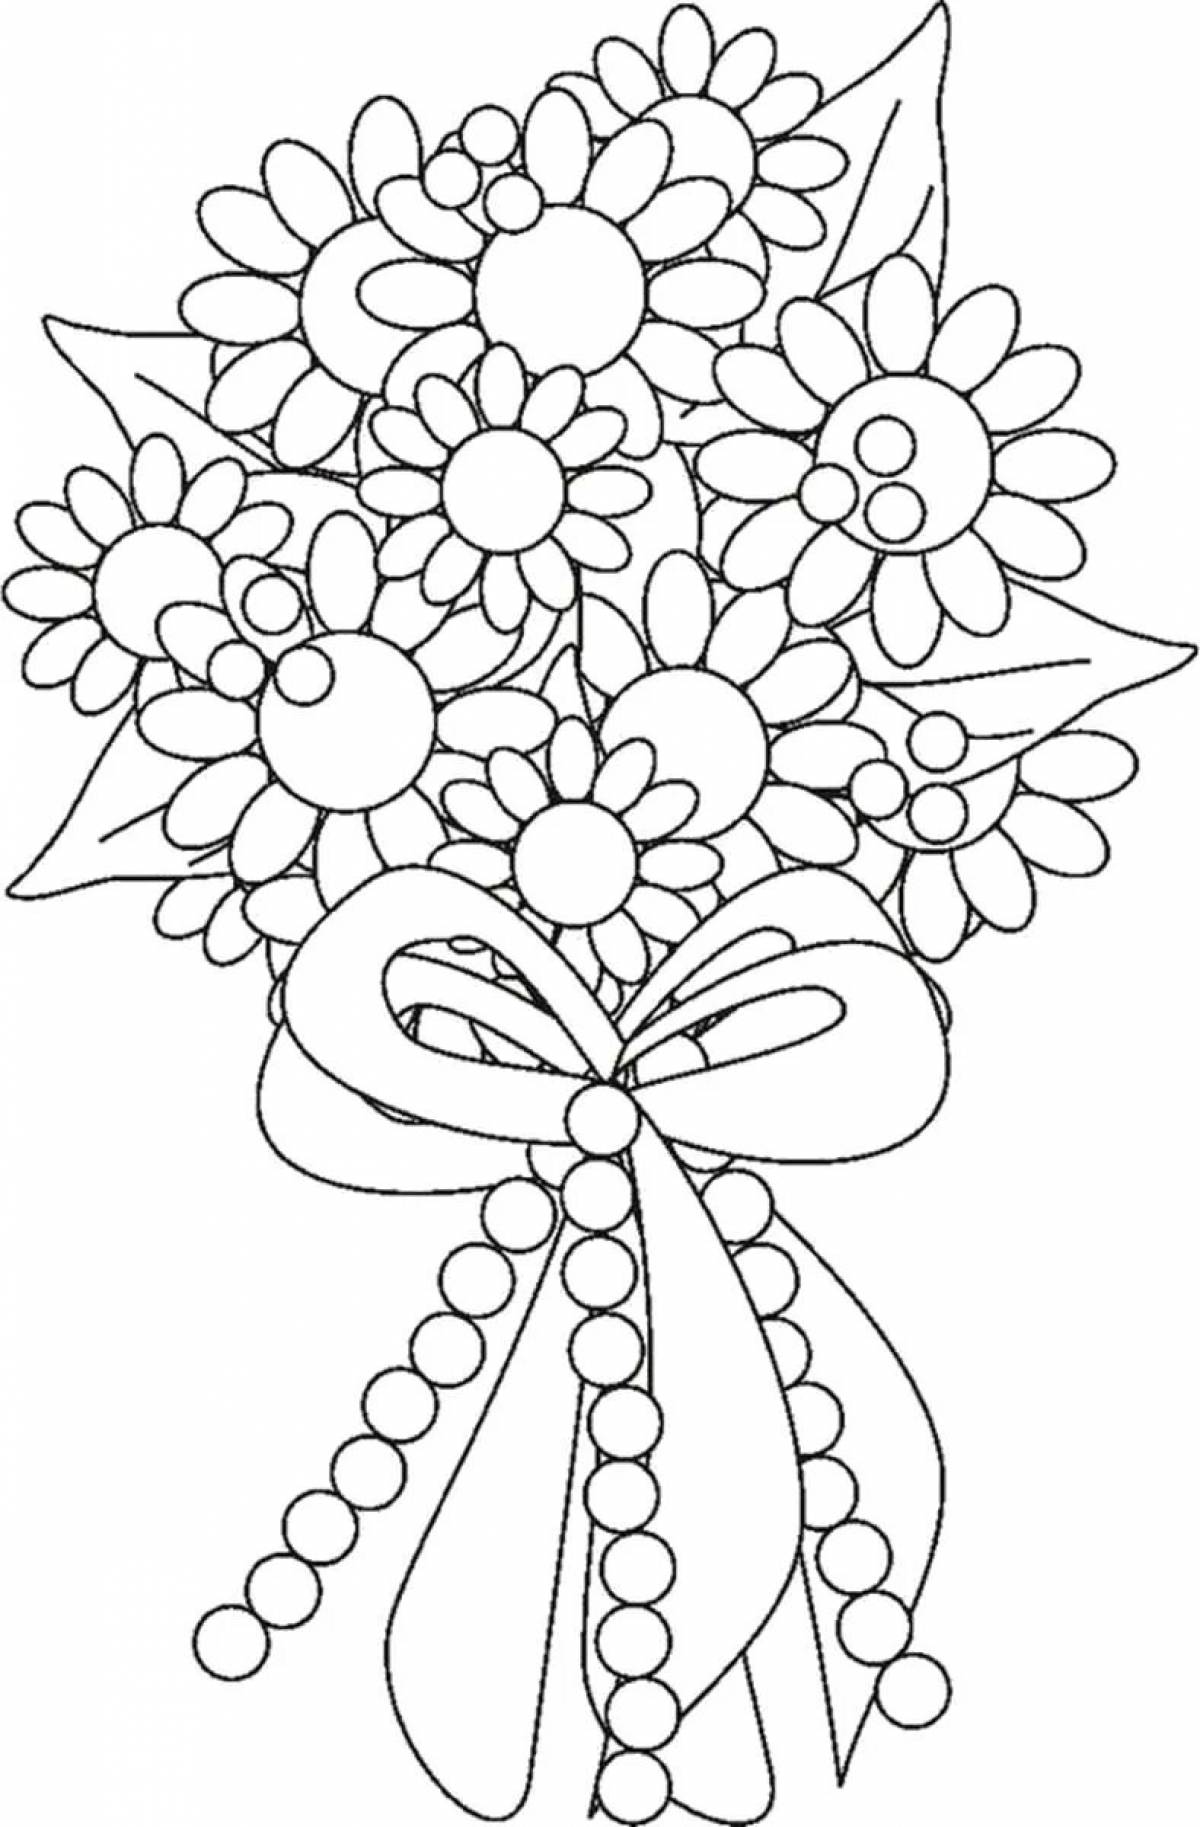 Glowing winter bouquet coloring page